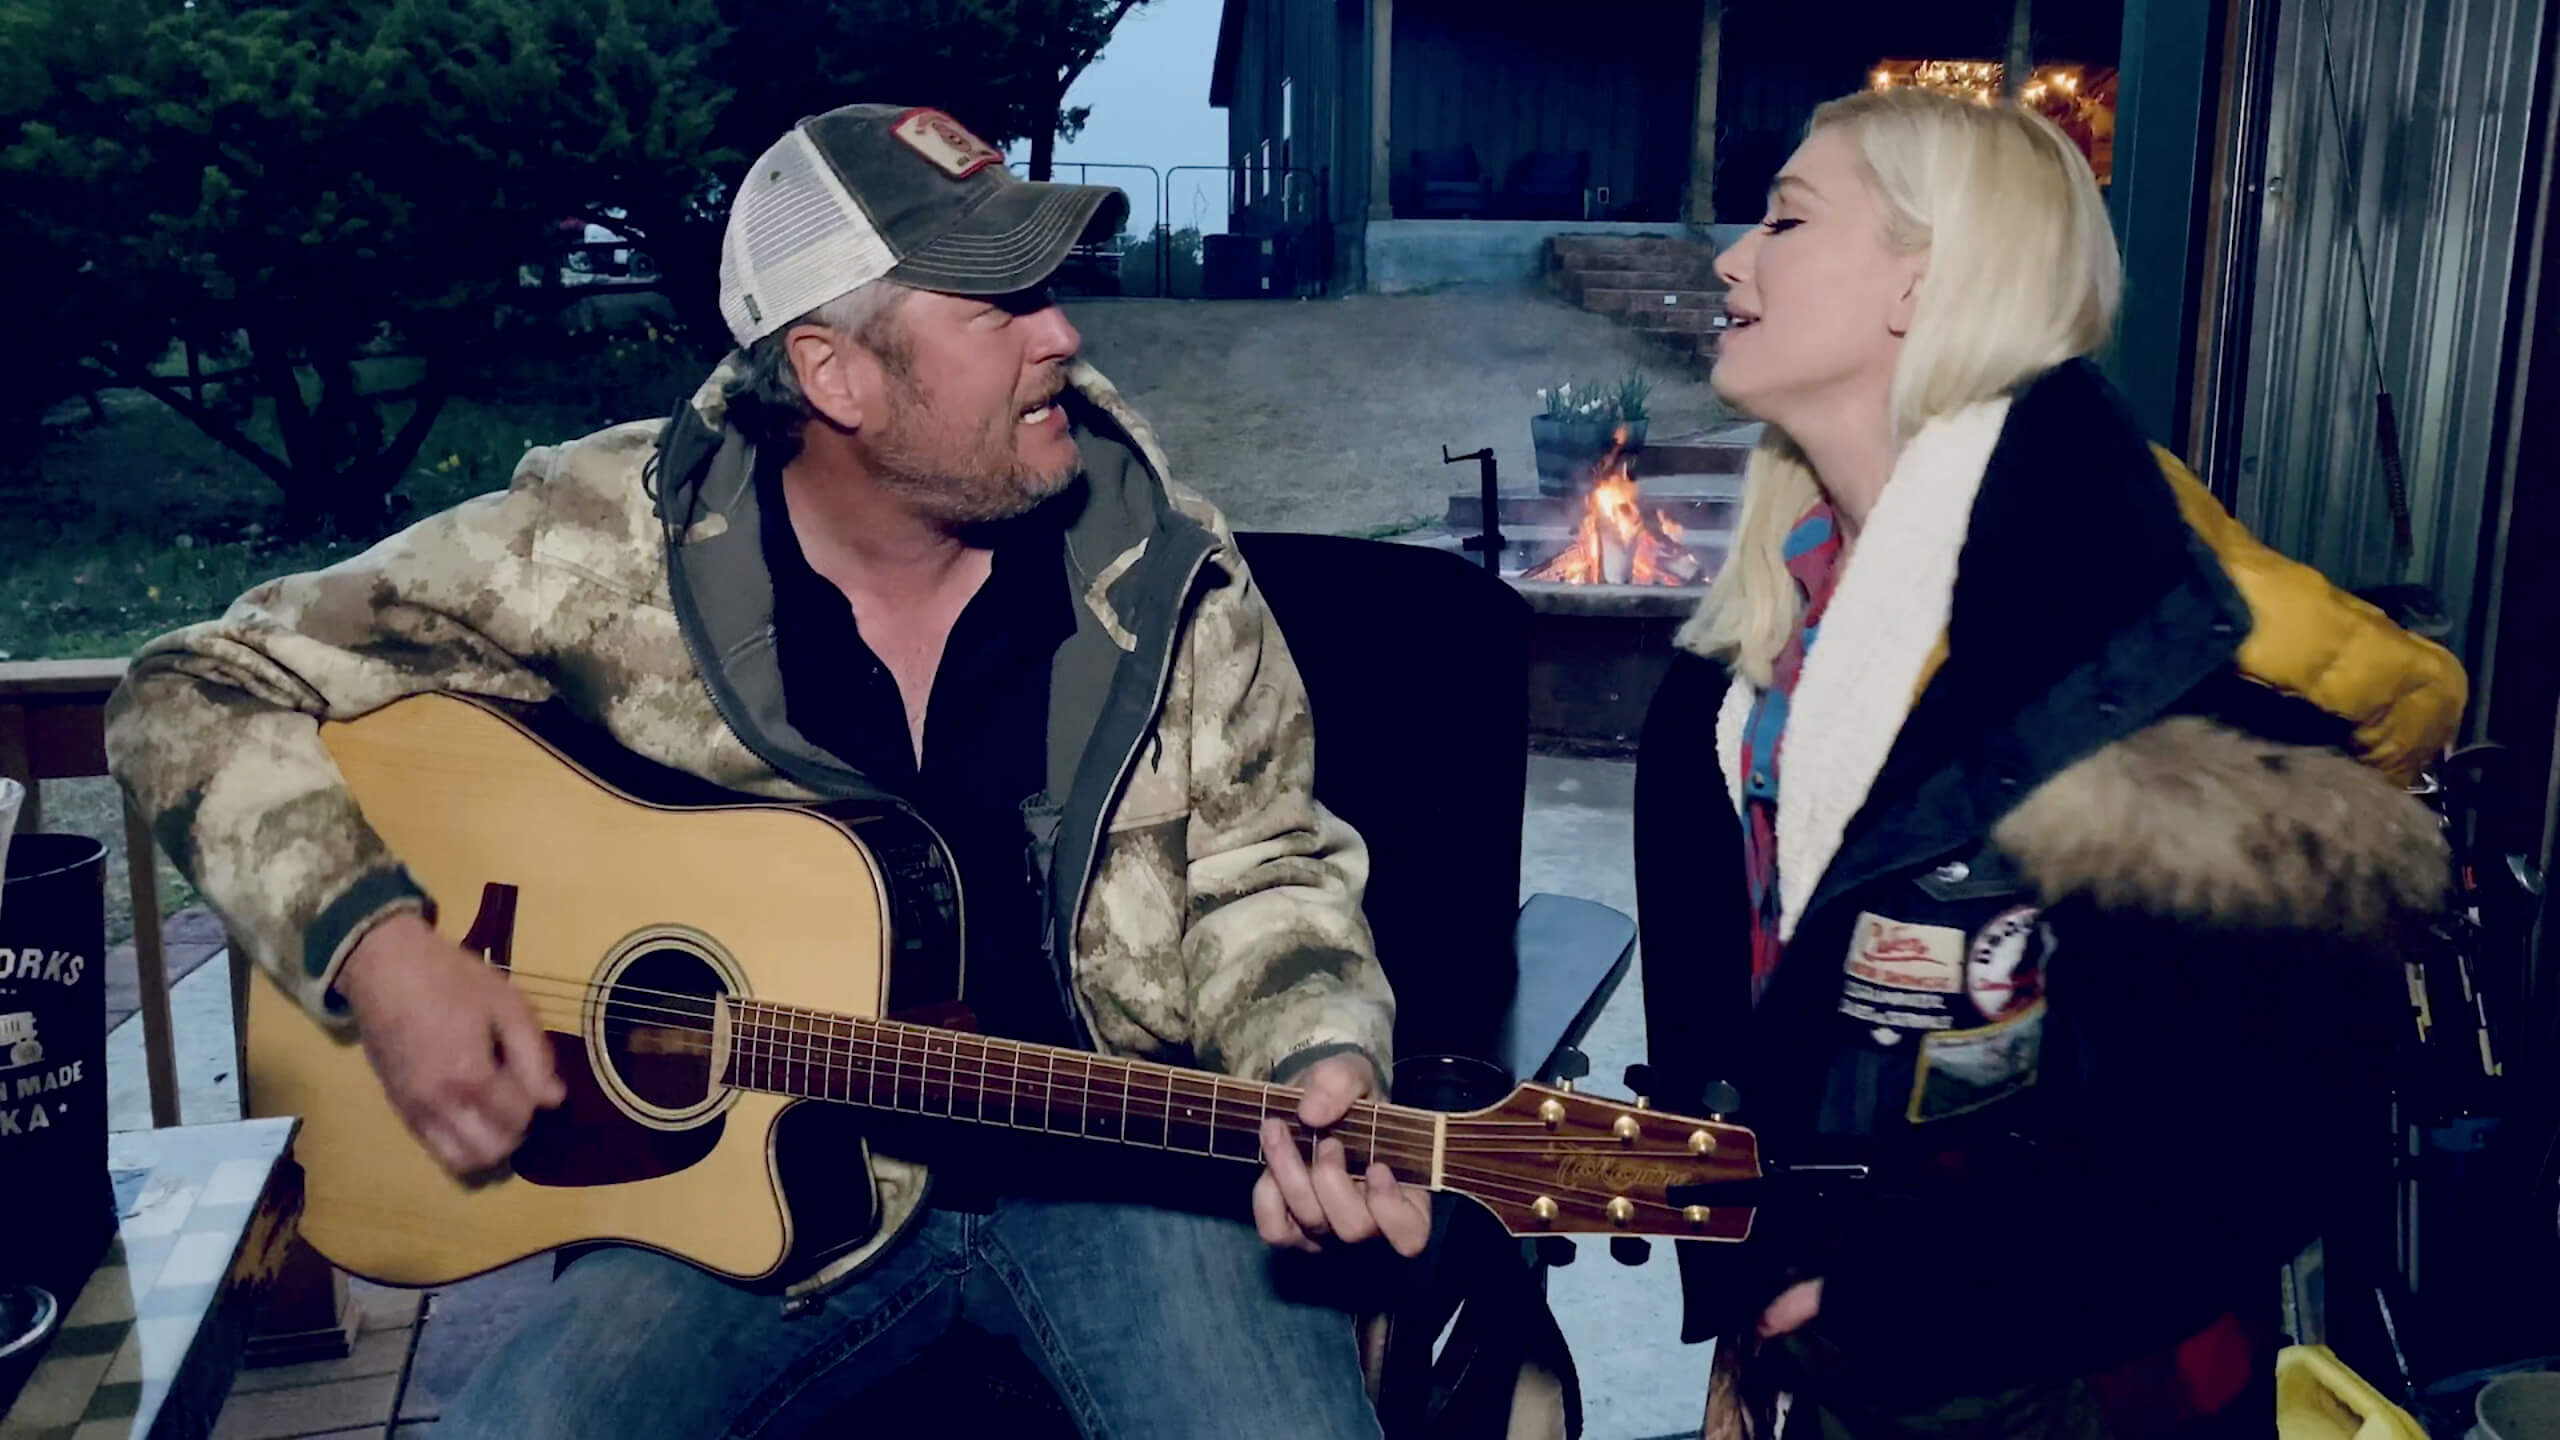 'The Voice' stars Blake Shelton and Gwen Stefani singing outside together in Oklahoma